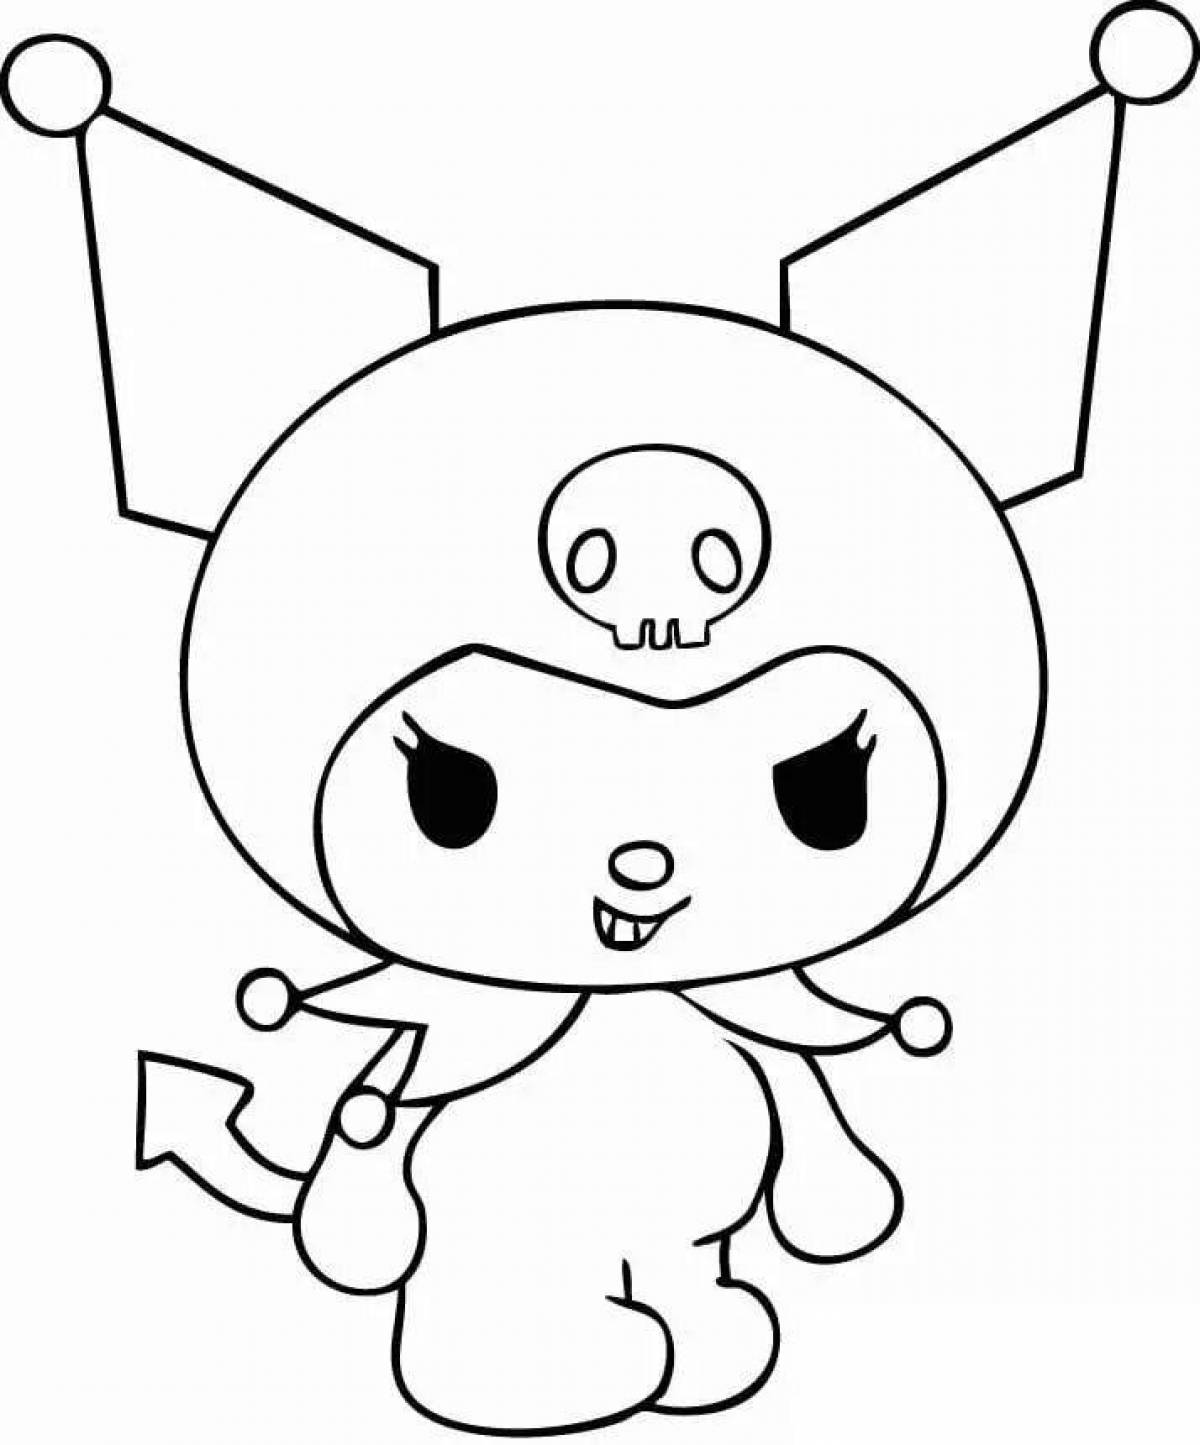 Color-overload chickens and hello kitty coloring page